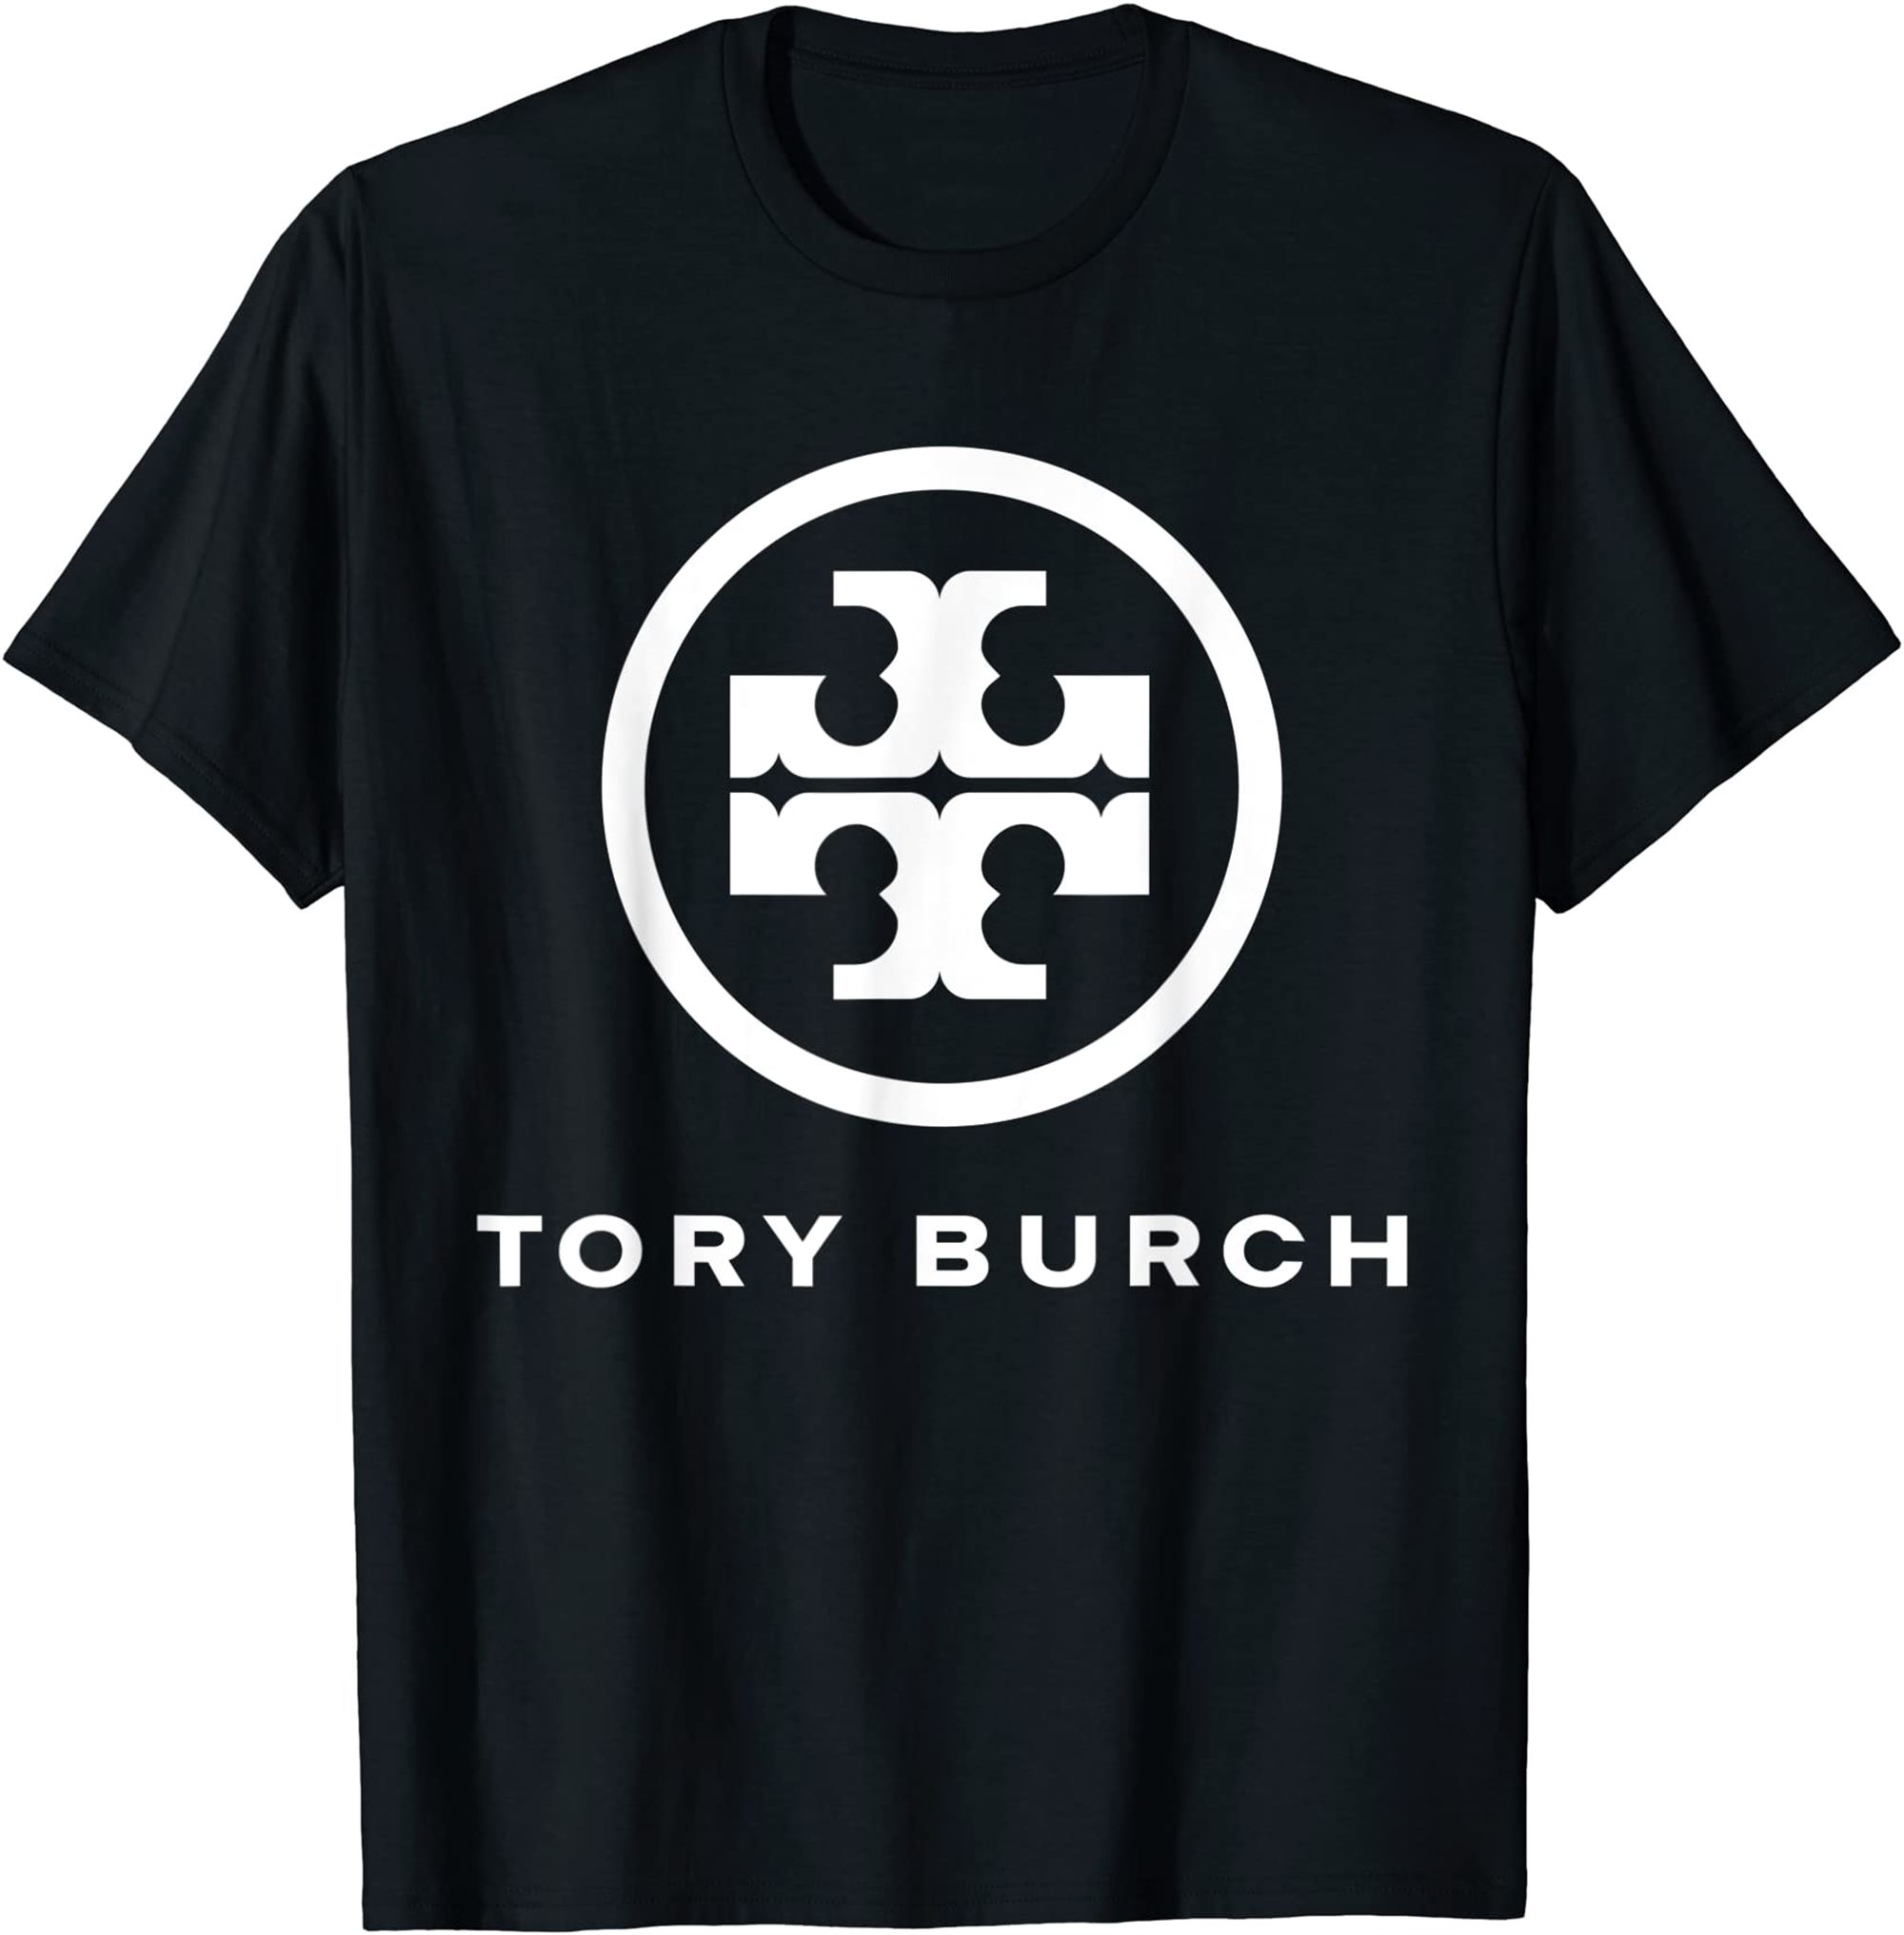 Black And White Burch Outfits Styles Vaporwave Fashion Fans T-shirt Full Size Up To 5xl